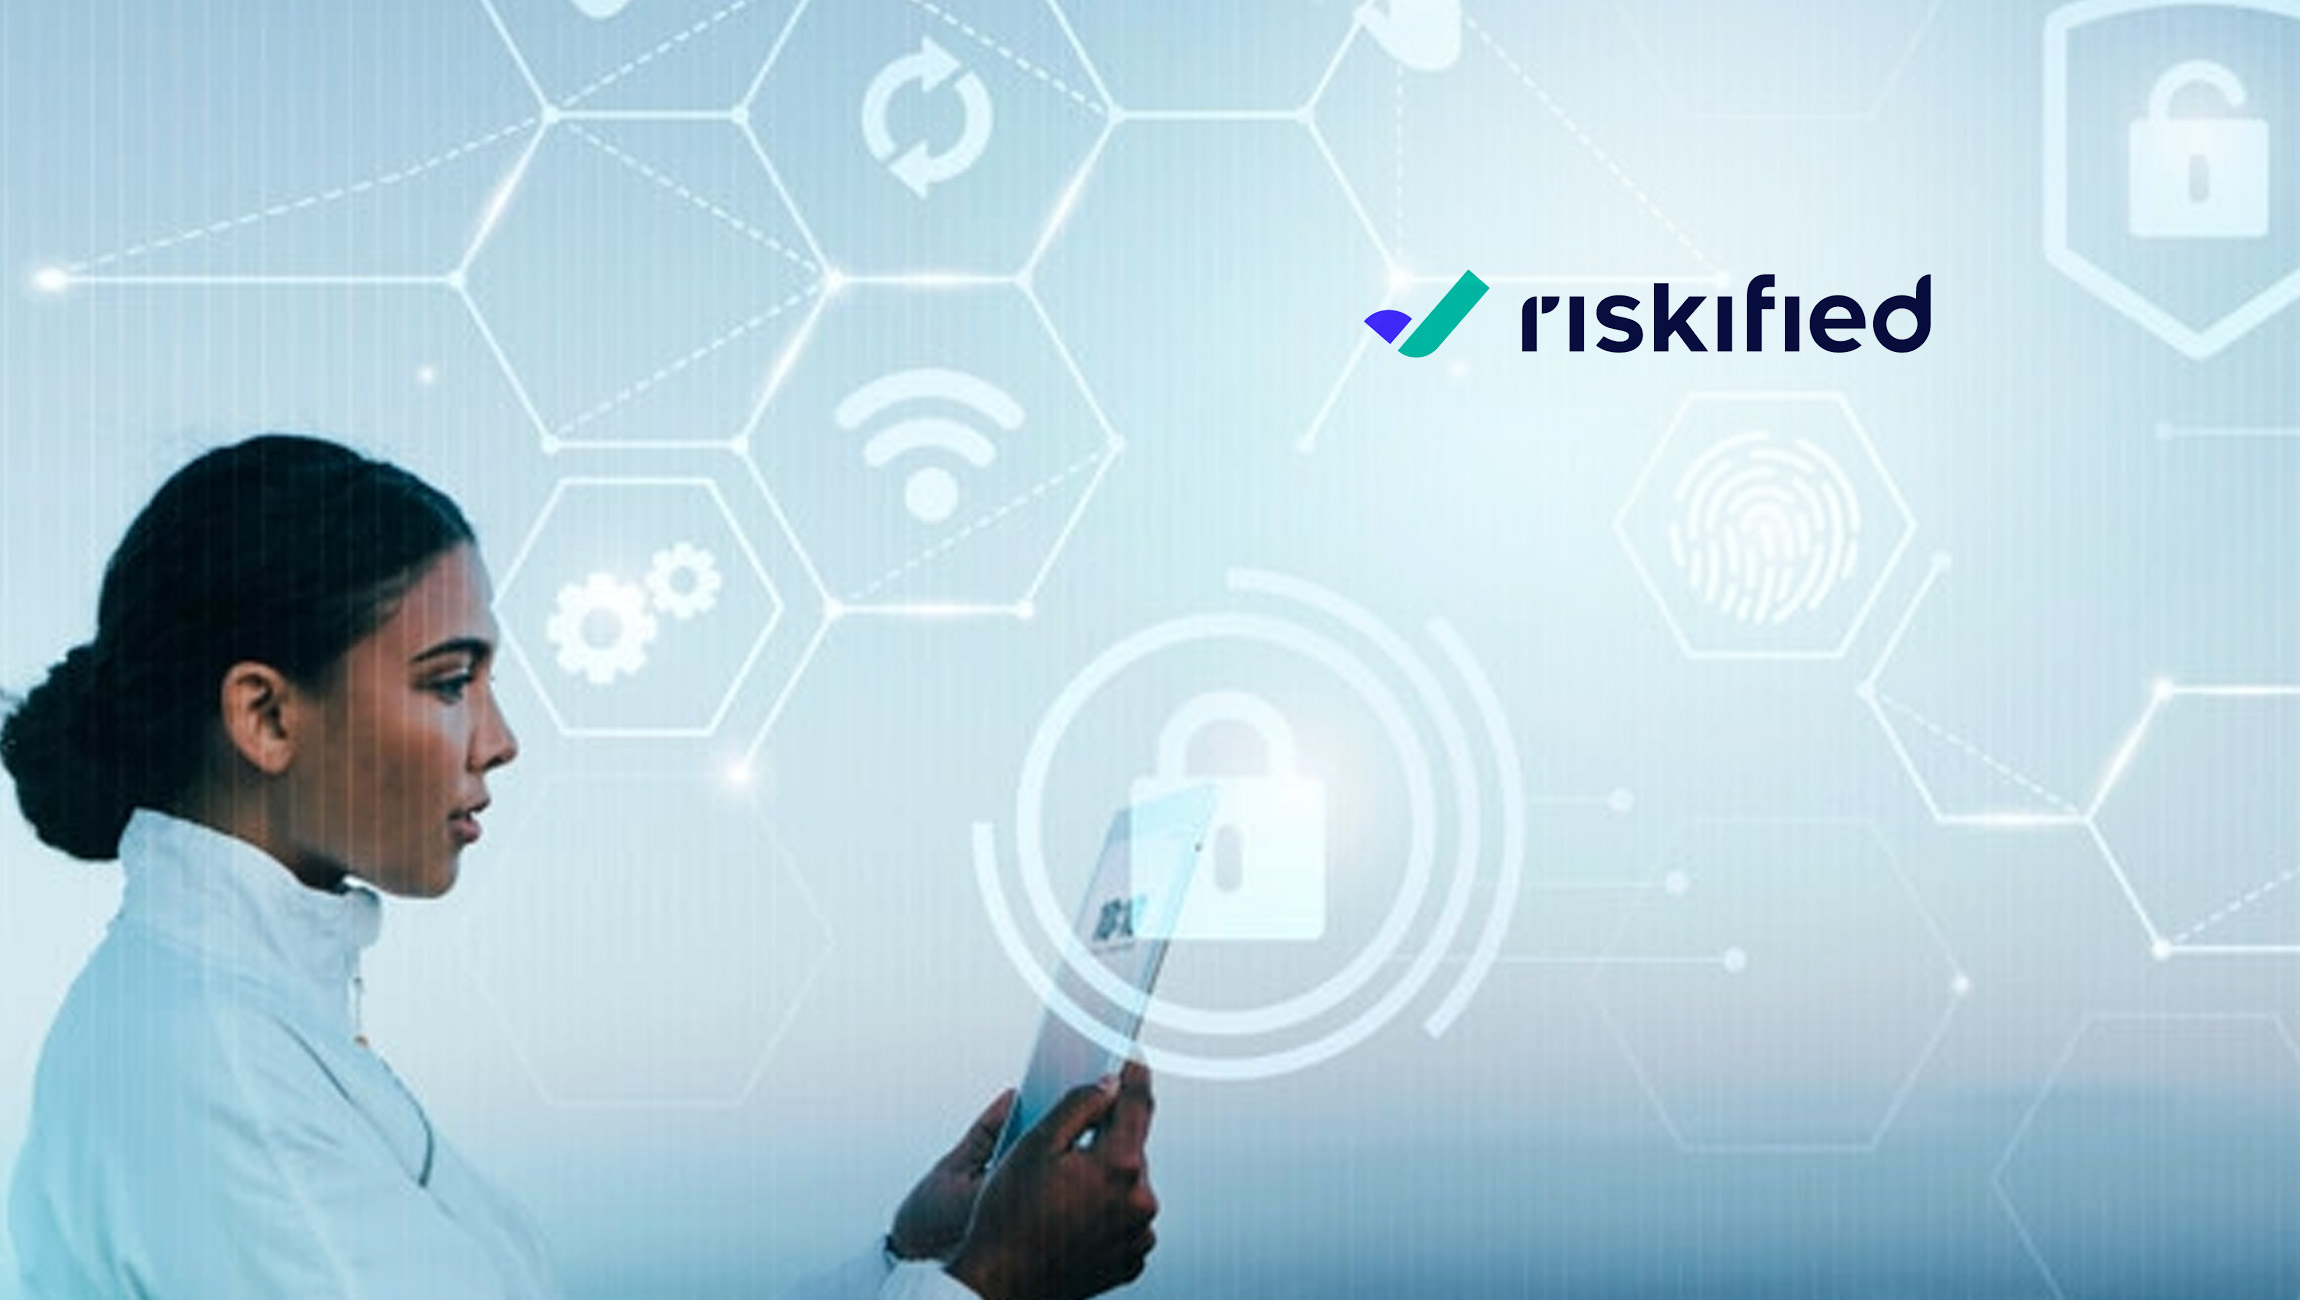 With Riskified, Ticketing Platform Gametime Improves eCommerce Approval Rates and Customer Satisfaction